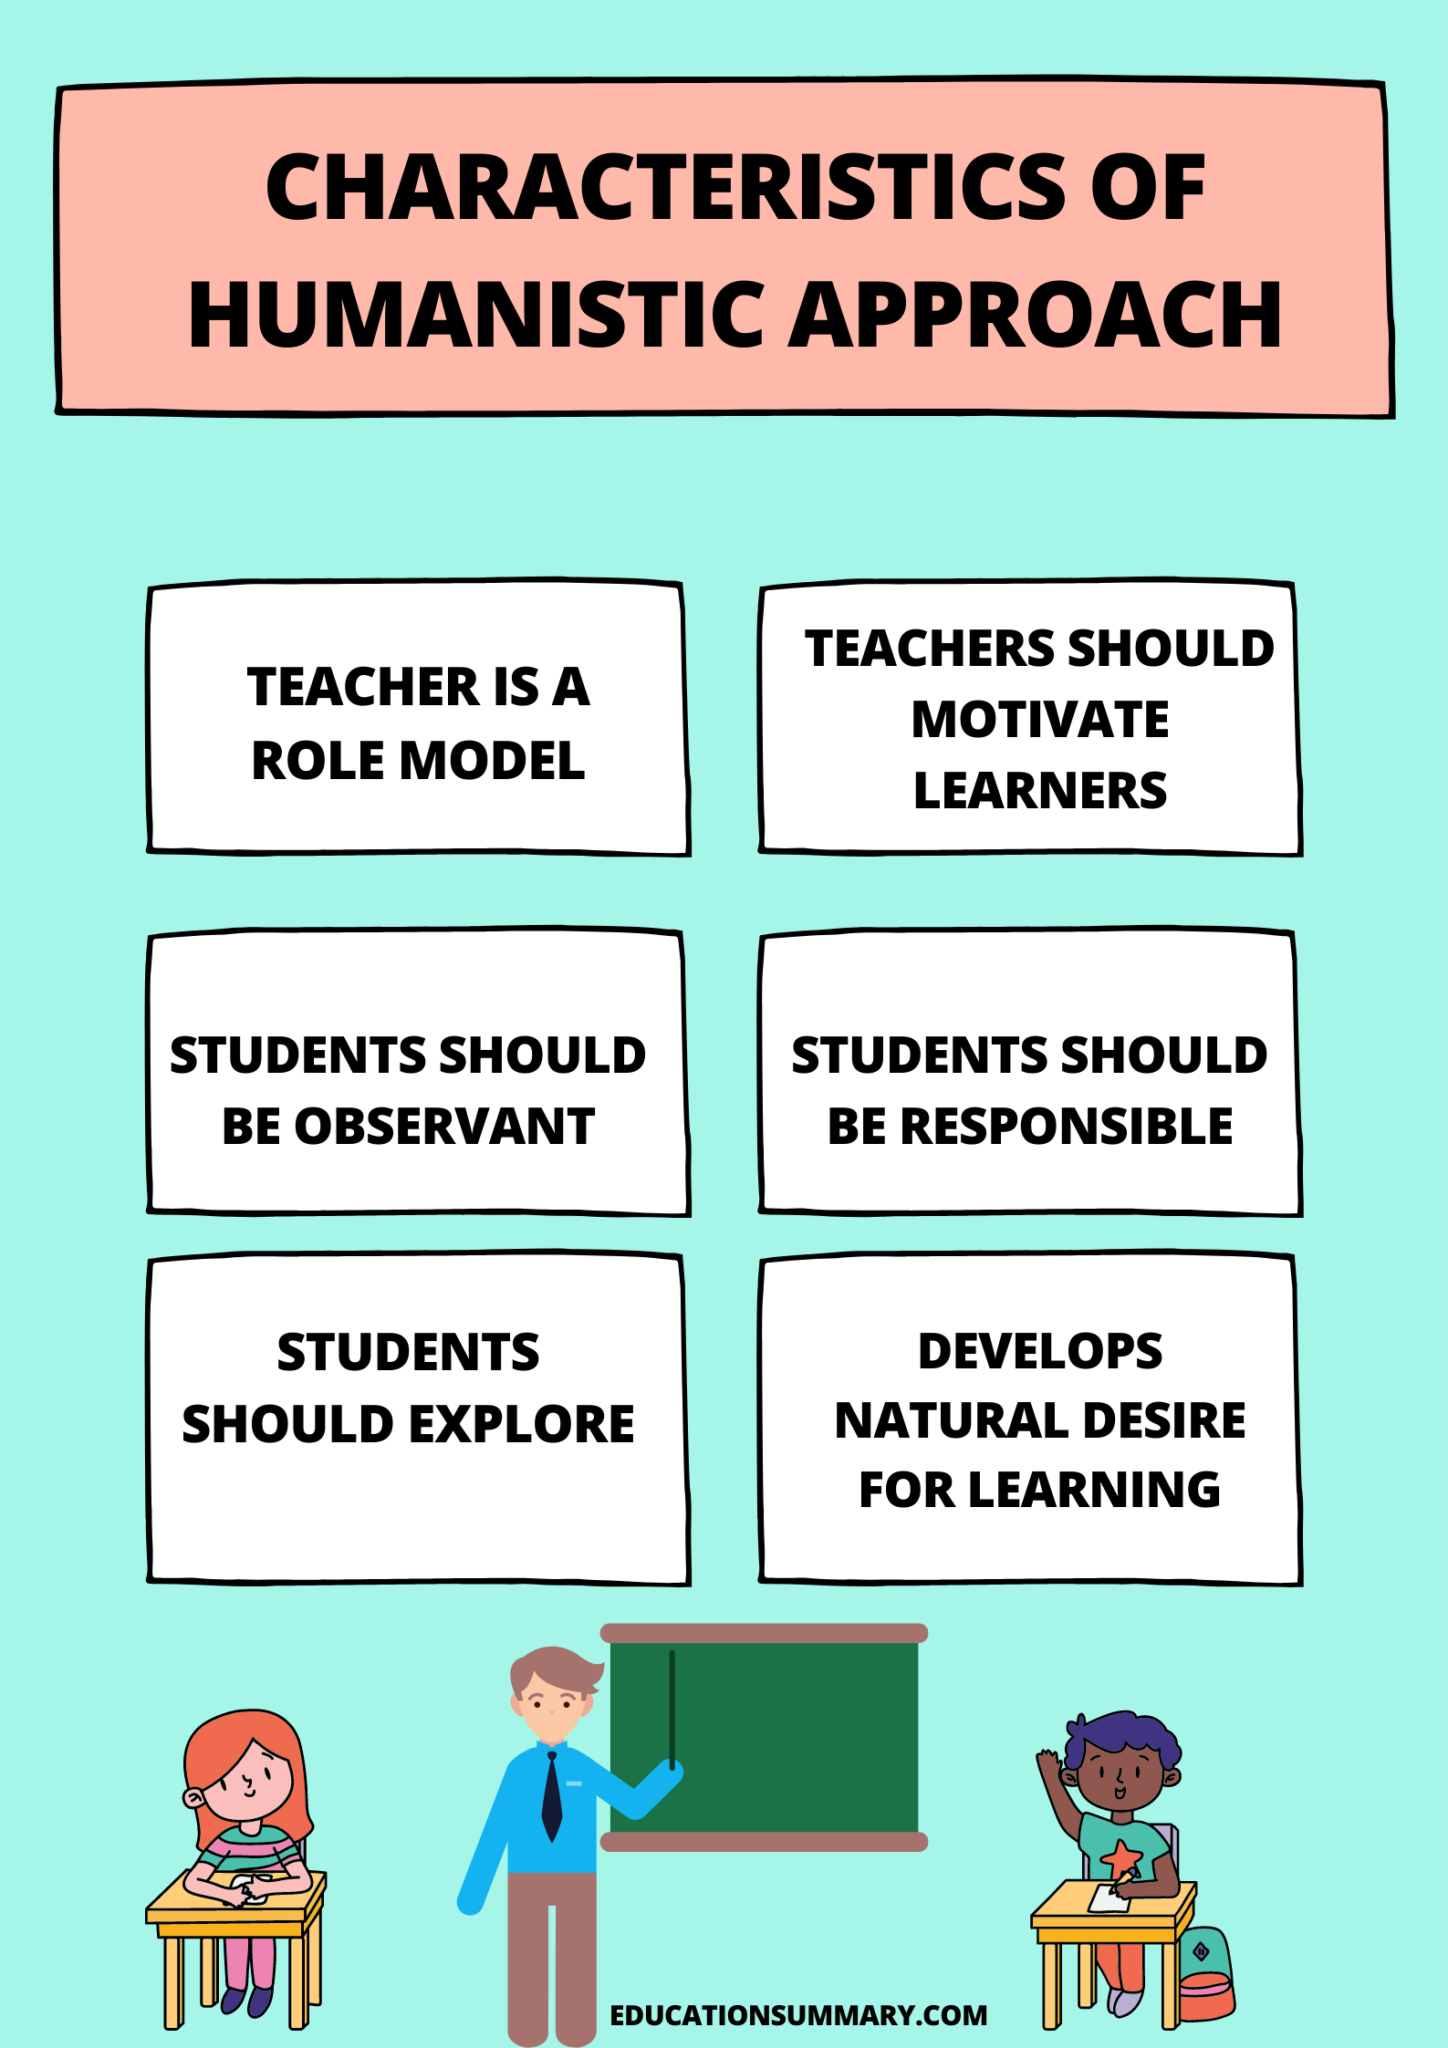 research methods for humanistic approach